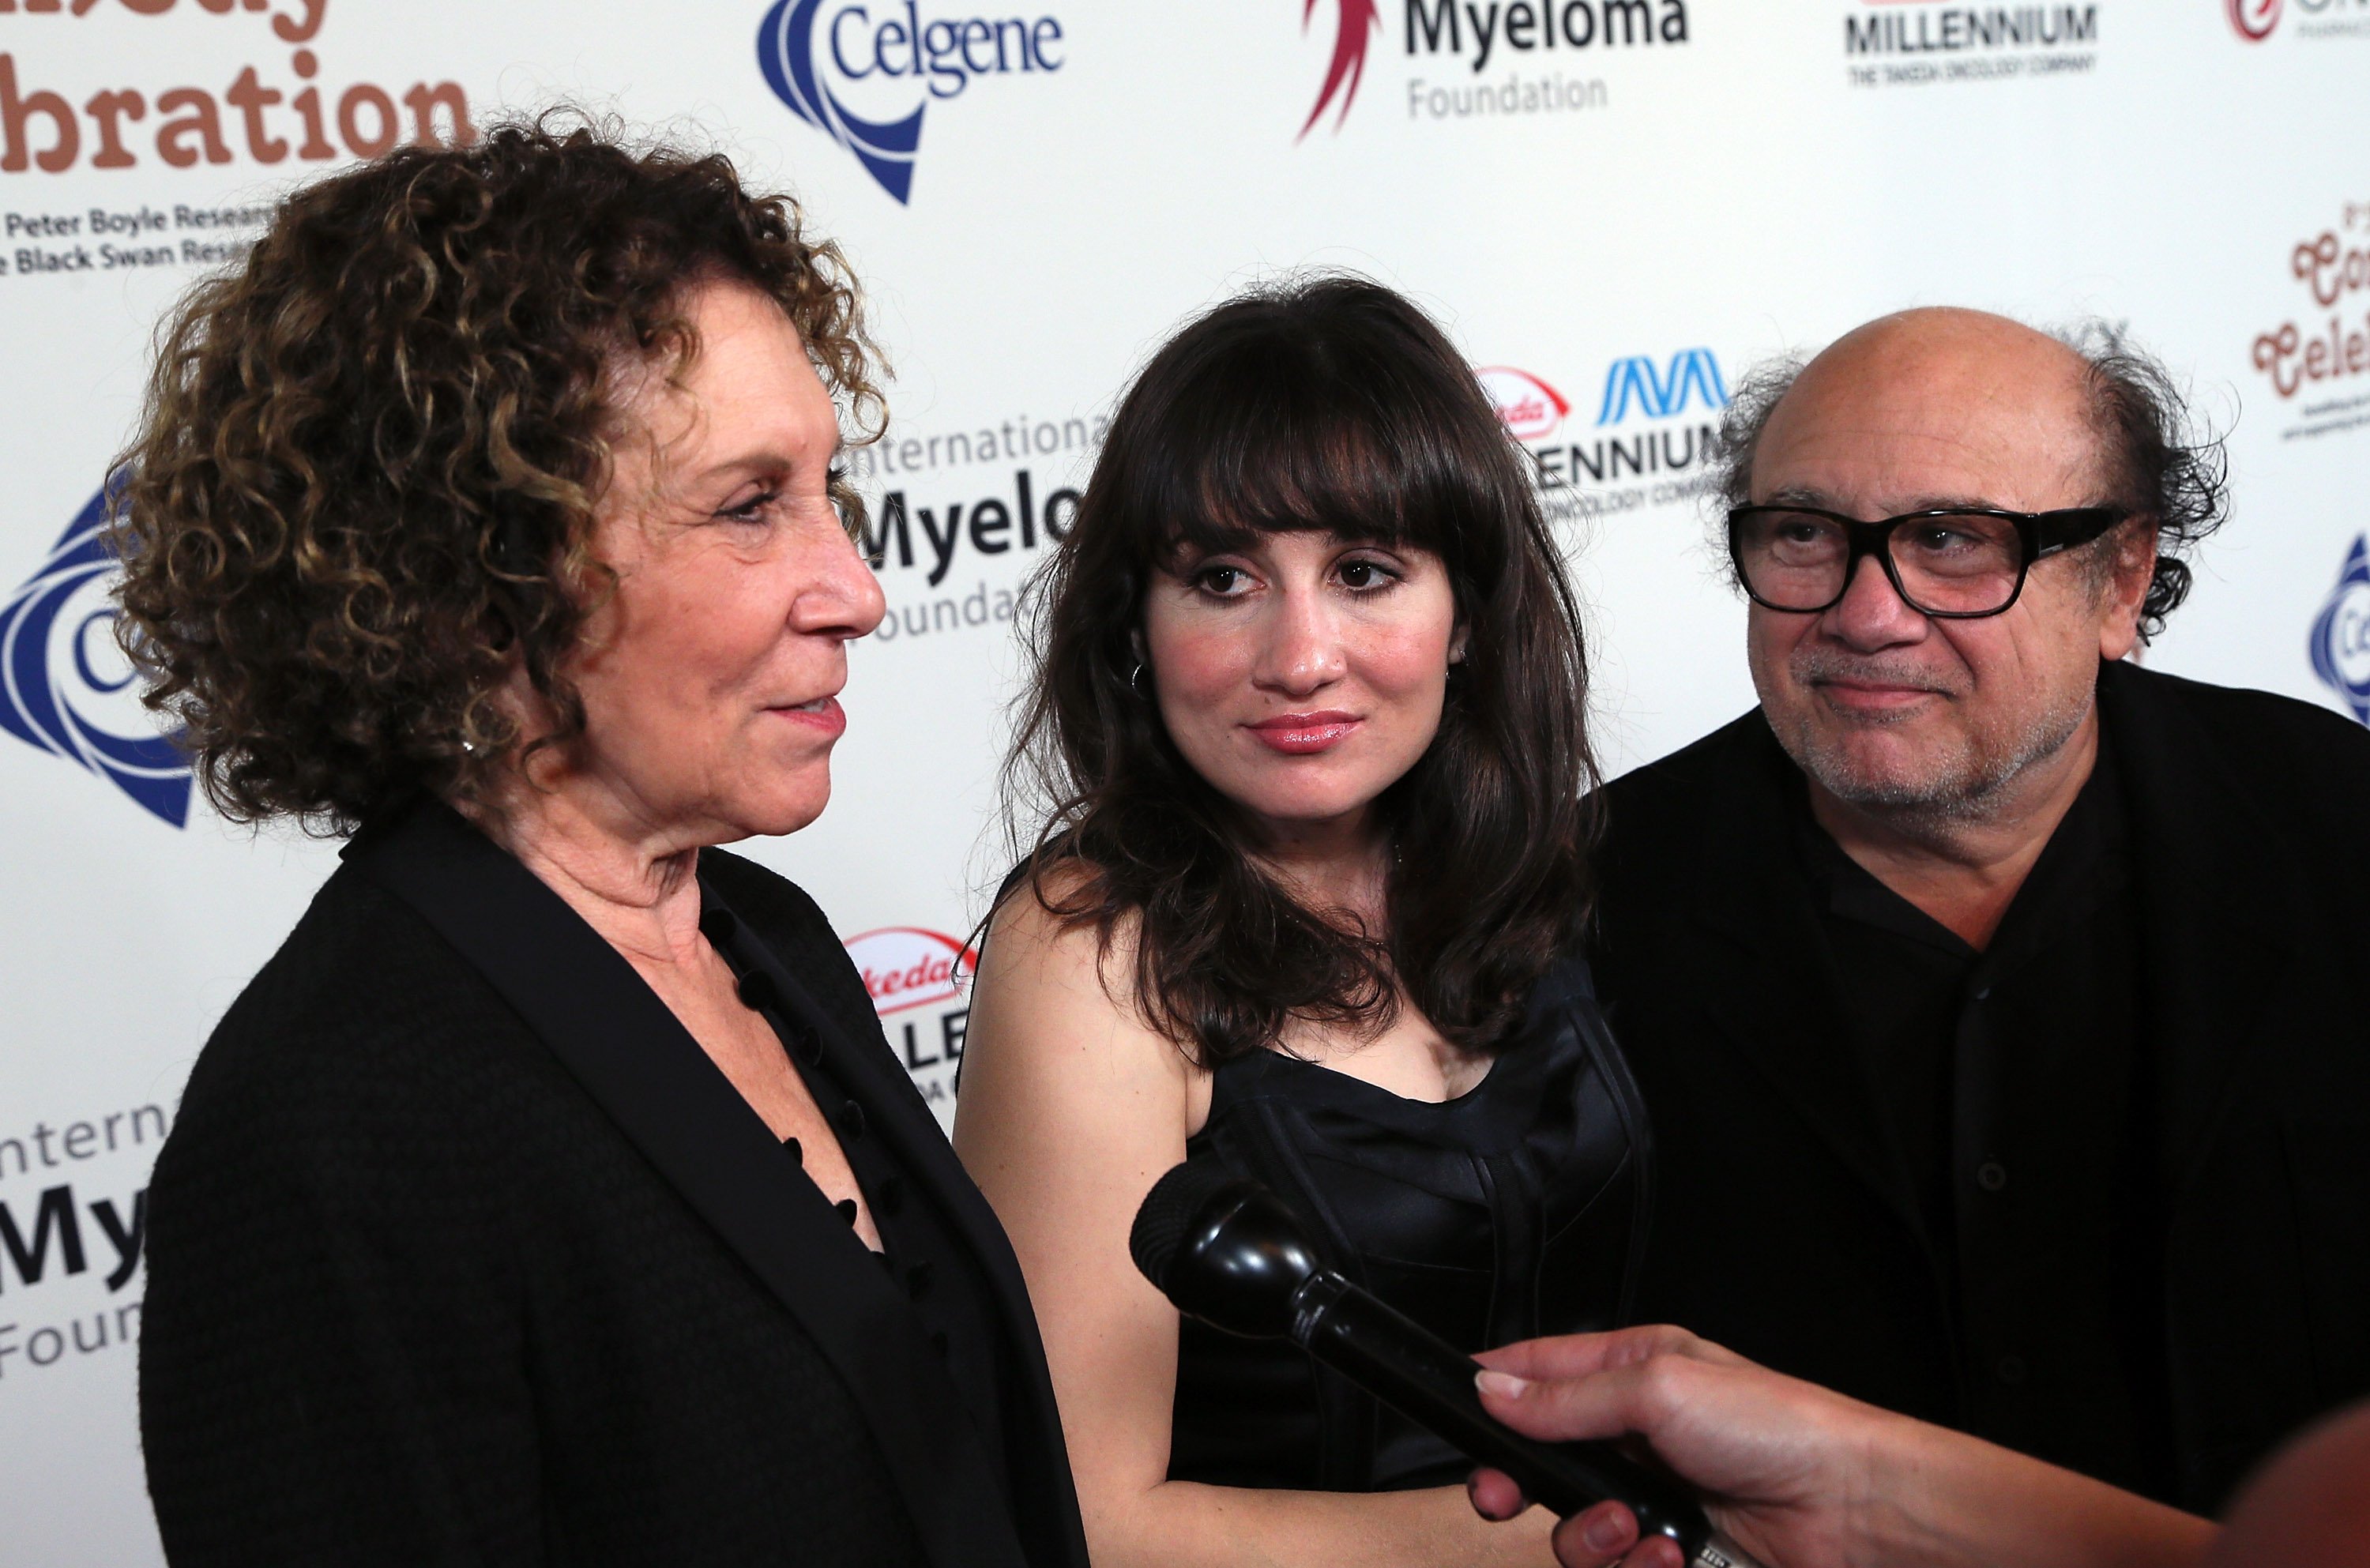 Rhea Perlman, daughter actress Lucy DeVito and Danny DeVito attend the International Myeloma Foundation's 8th Annual Comedy Celebration at the Wilshire Ebell Theatre on November 8, 2014 in Los Angeles, California. Photo: Getty Images